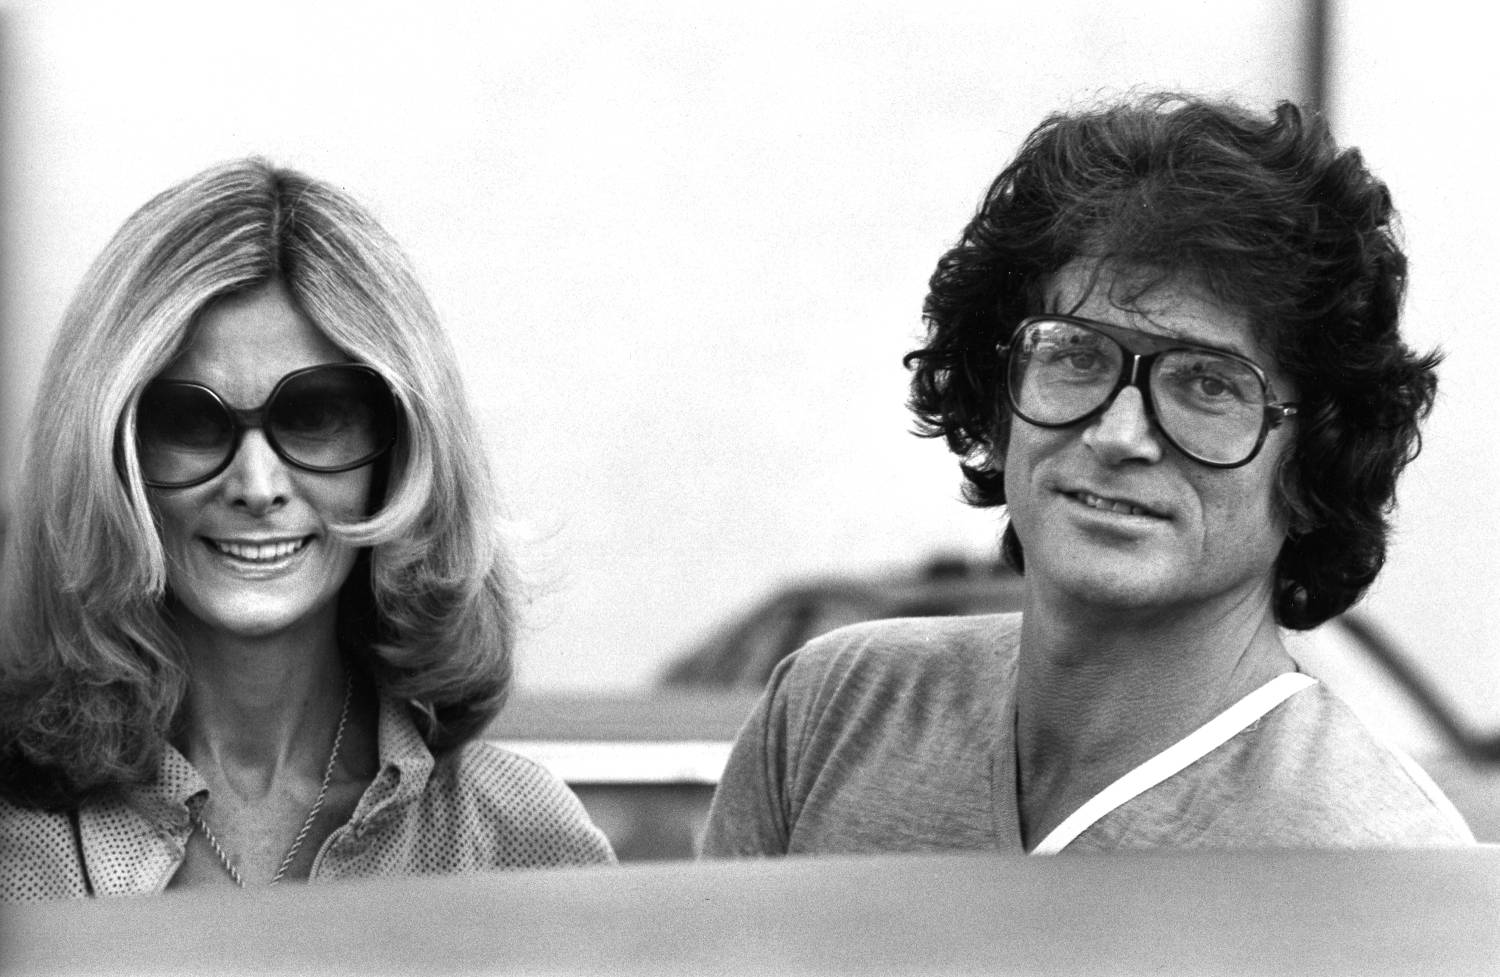 Actor Michael Landon and wife Lynn Noe sighted on February 9, 1979 on Rodeo Drive in Beverly Hills, California.